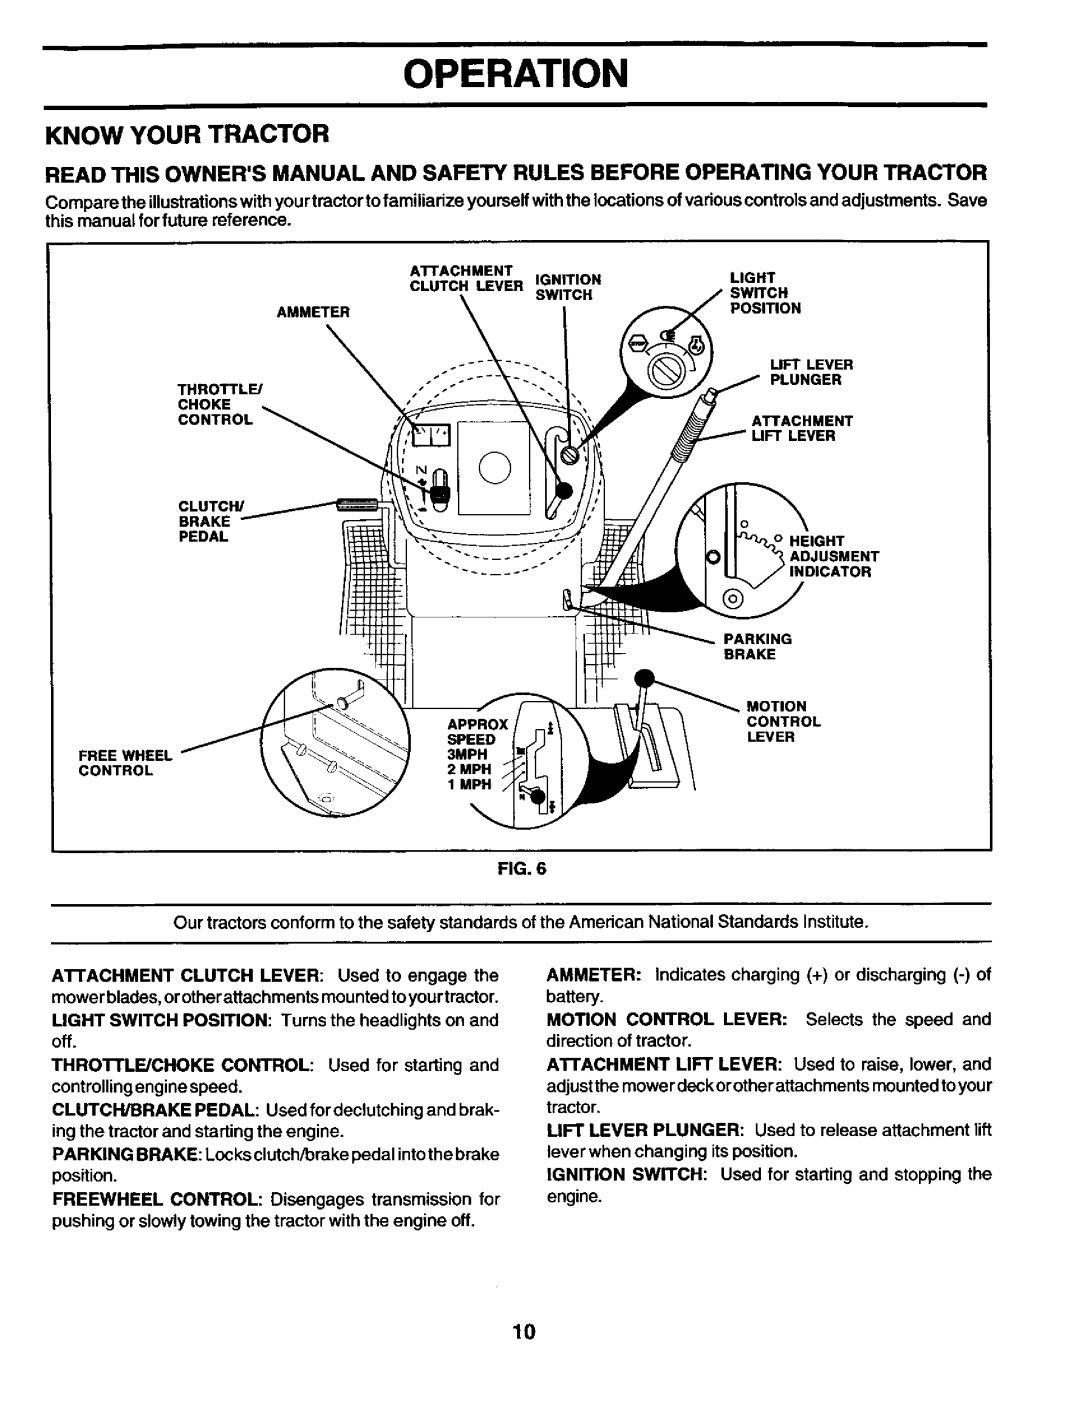 Craftsman 944.602951 owner manual Operation, Know Your Tractor 